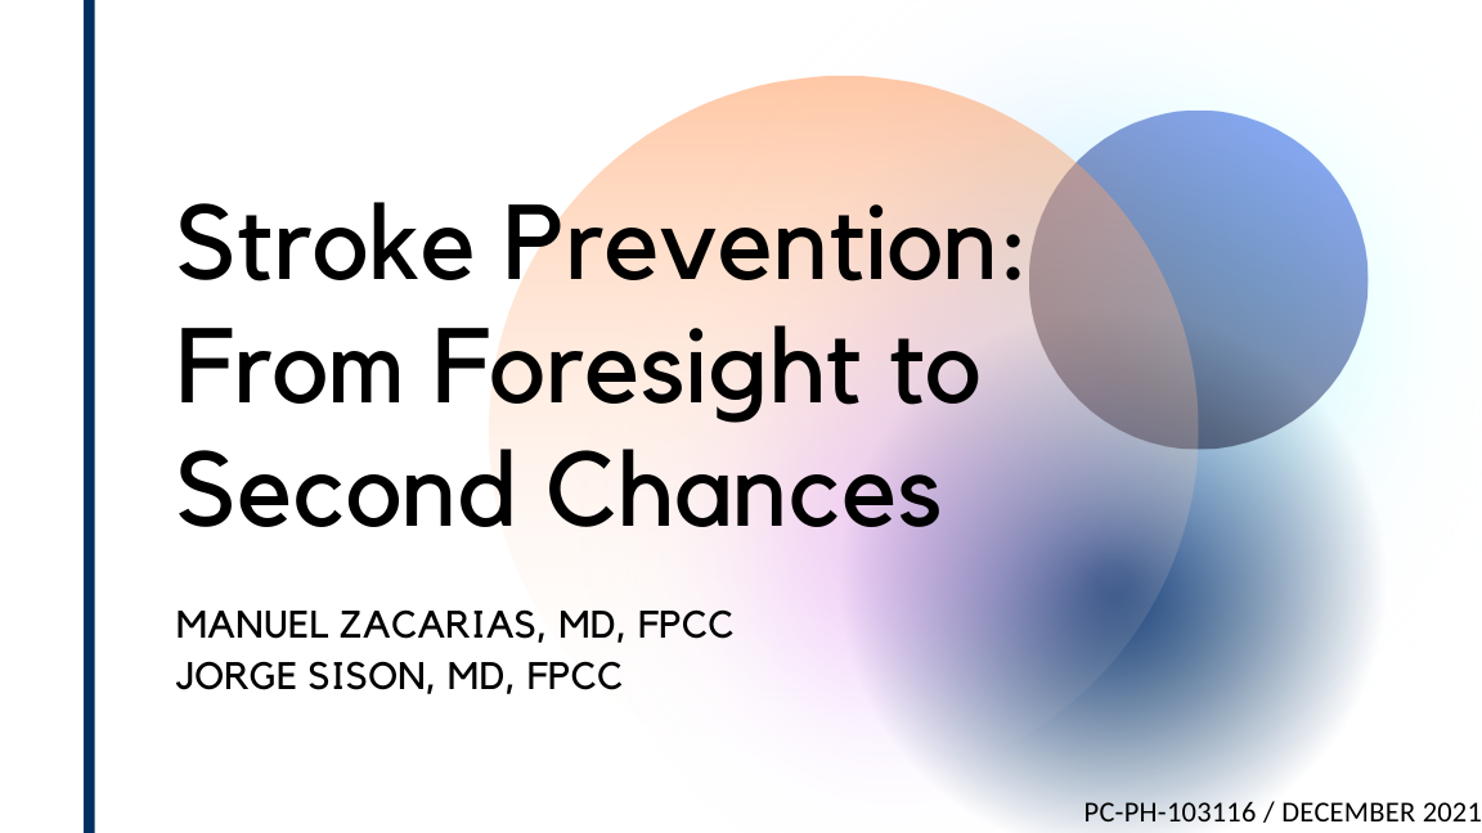 Stroke Prevention: From Foresight to Second Chances